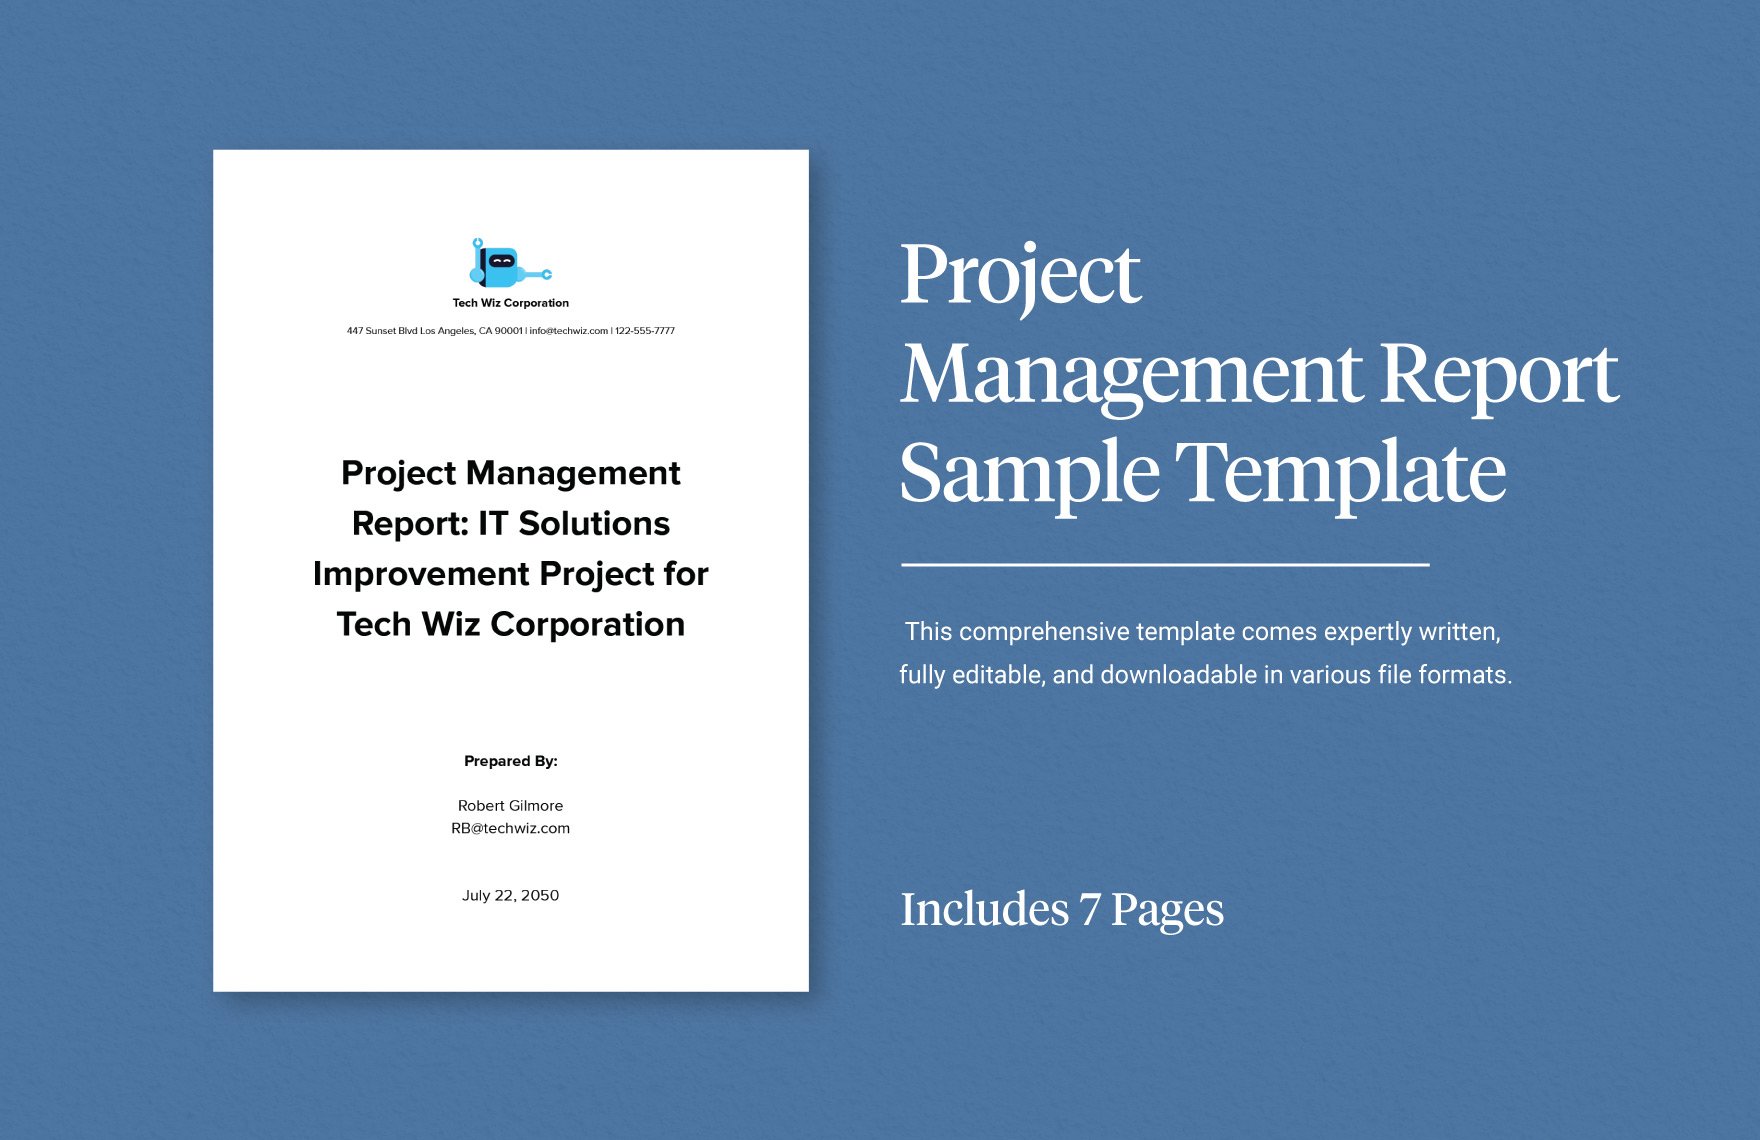 Project Management Report Sample Template